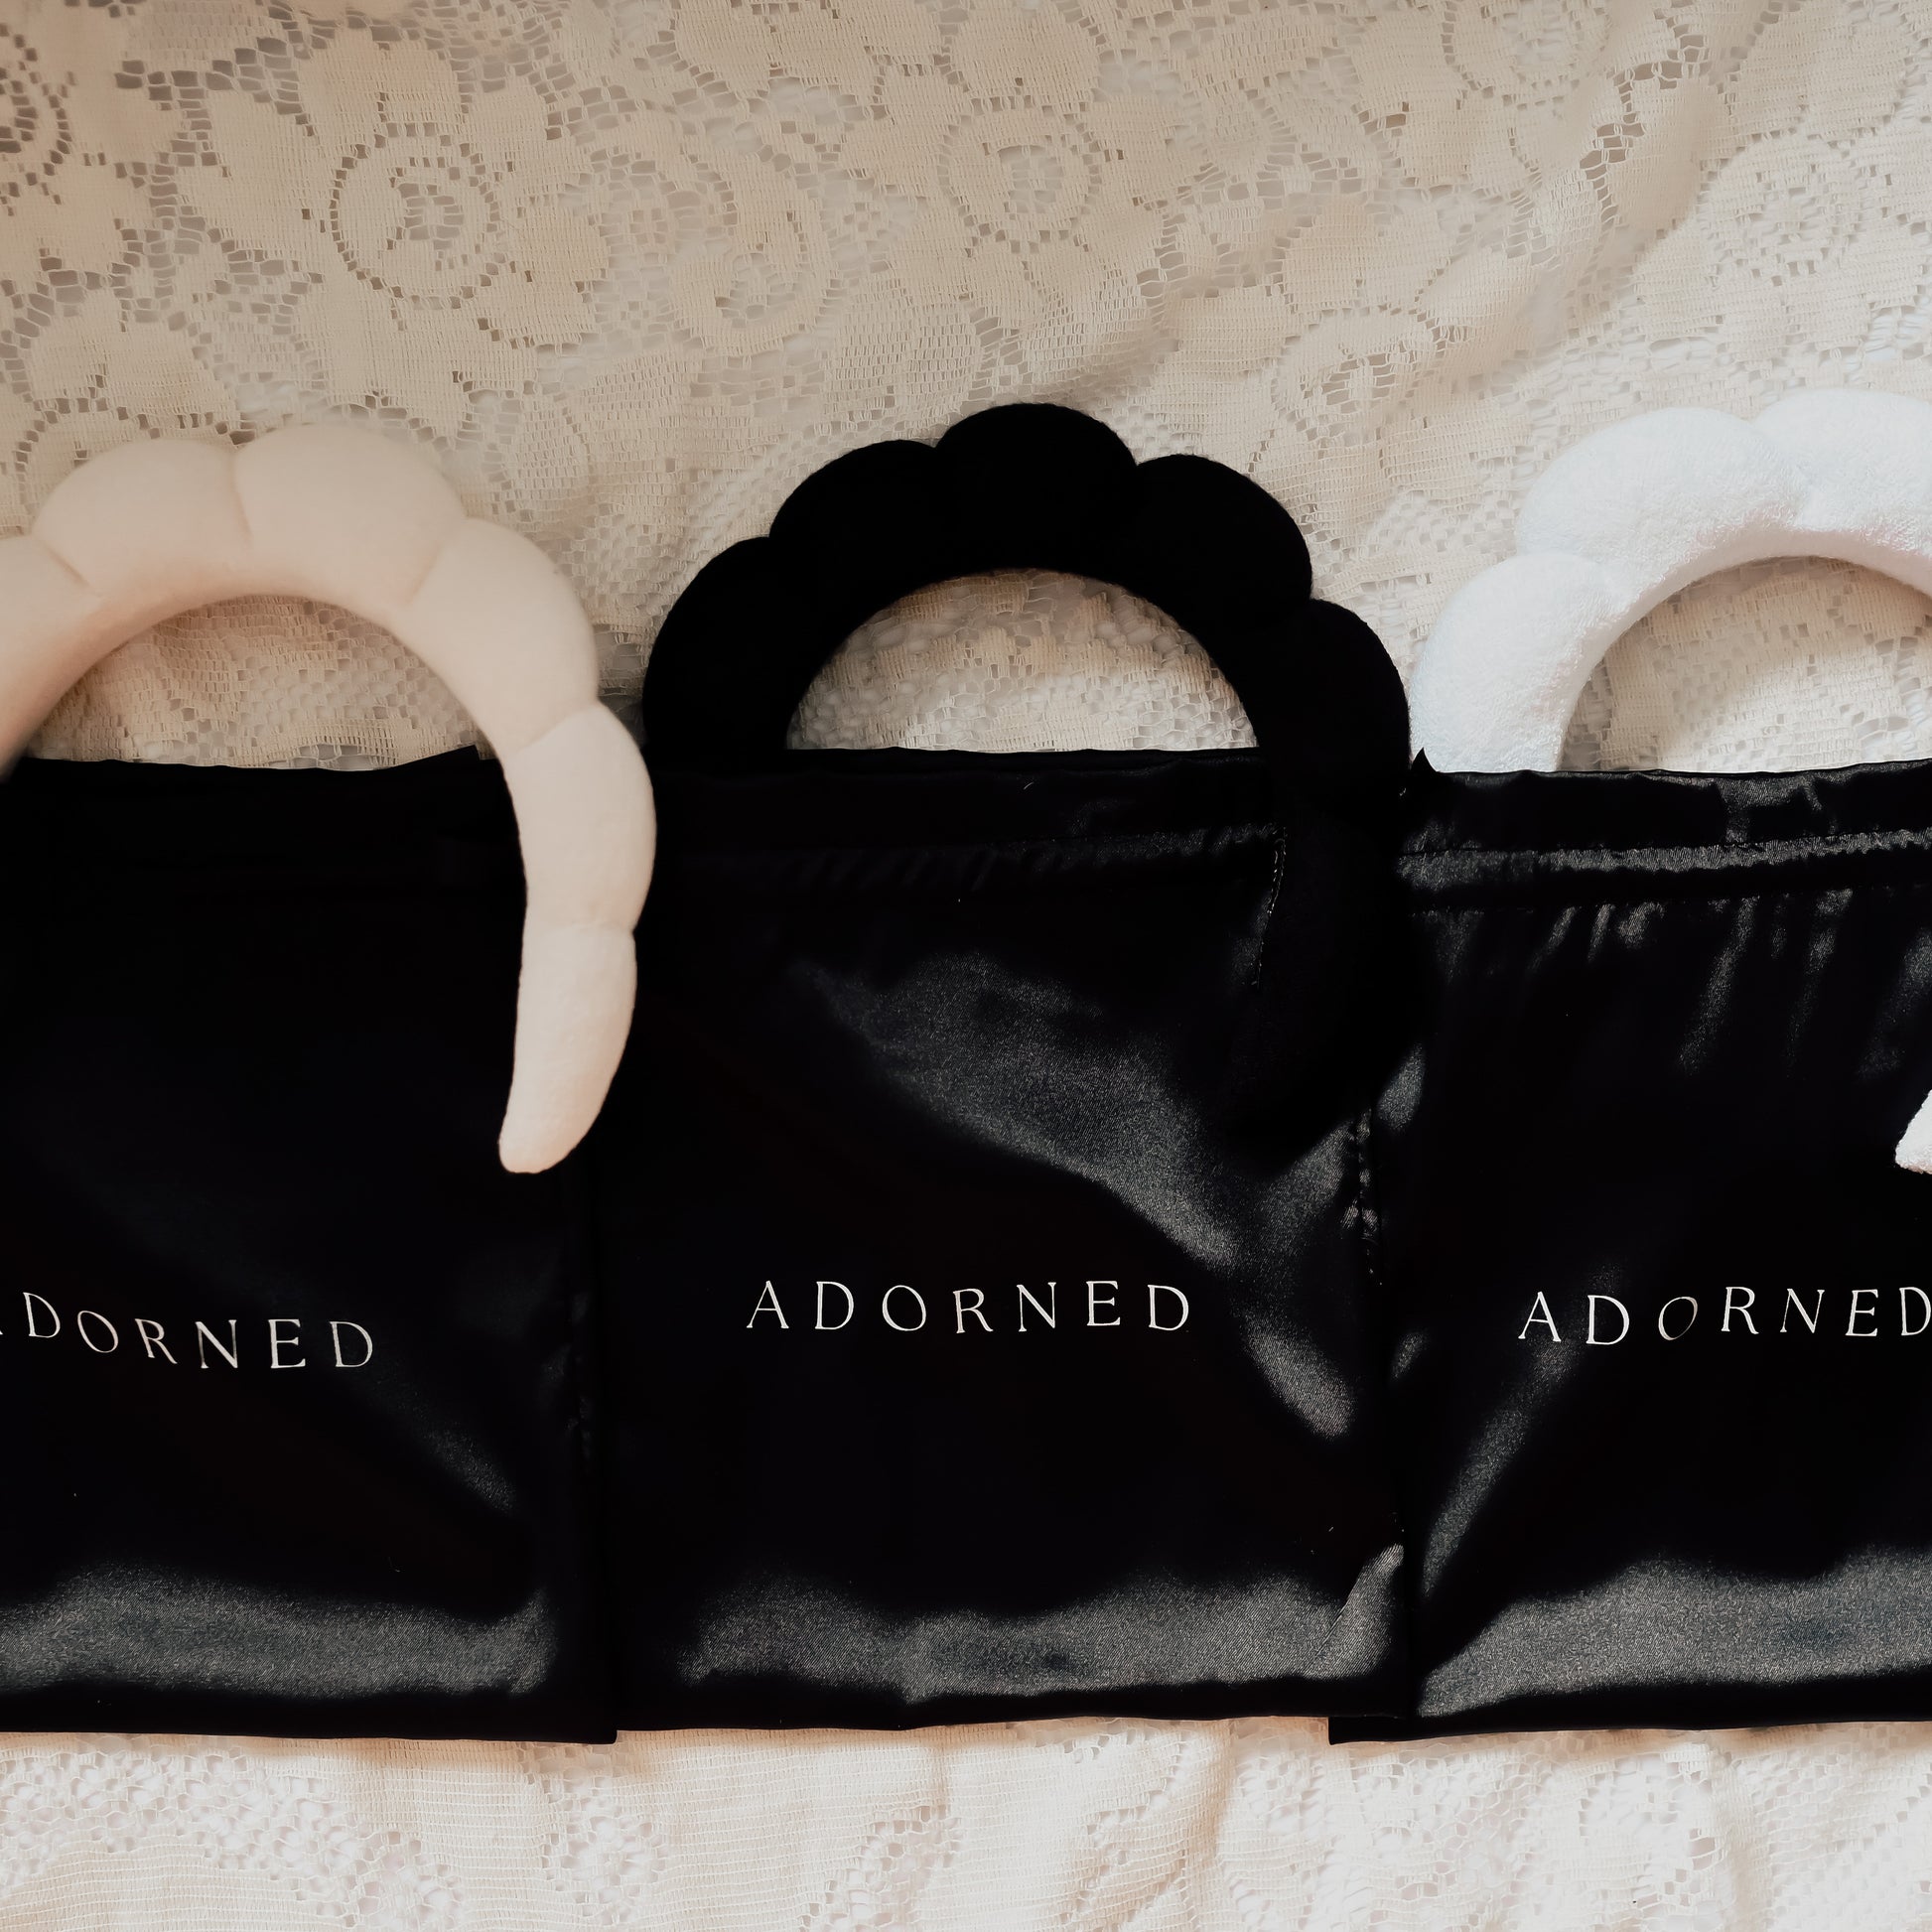 LUXE SPA BAND – Adorned